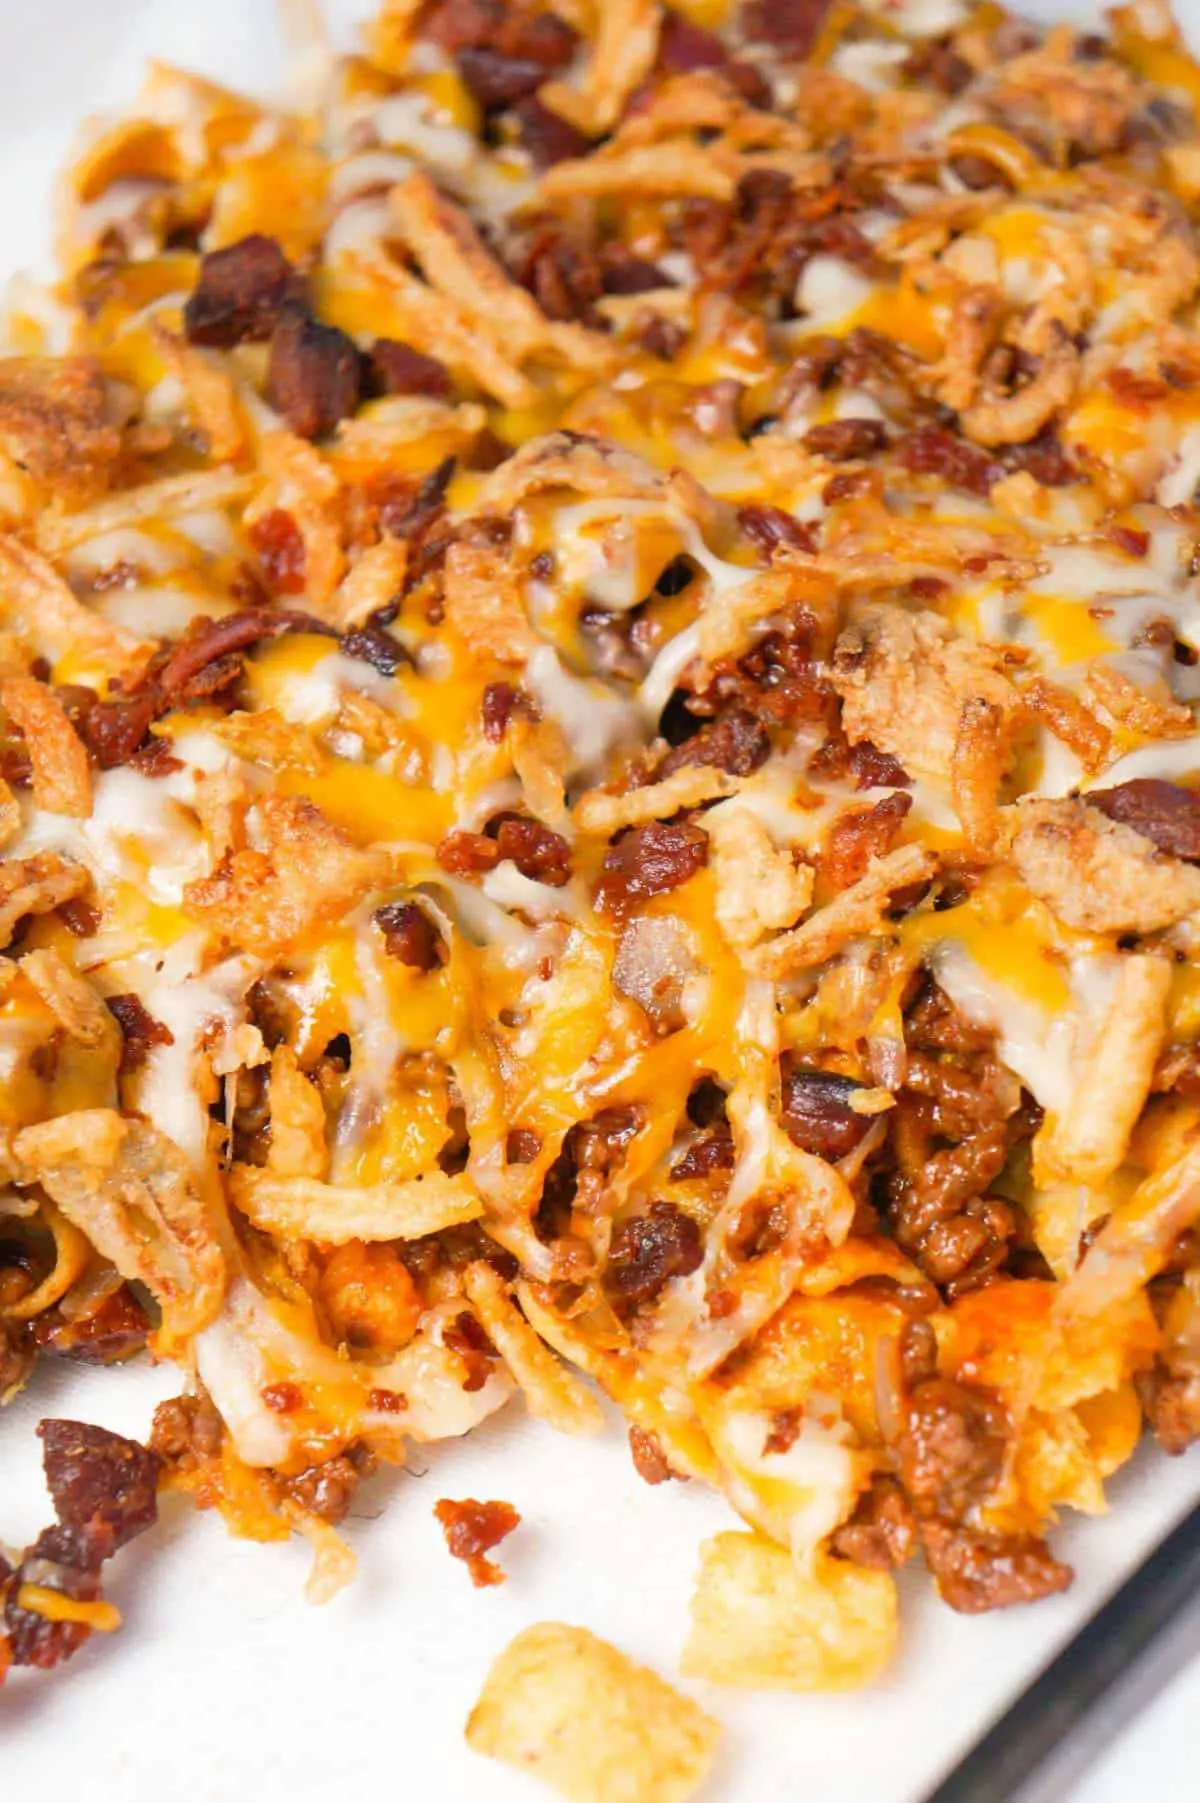 BBQ Bacon Cheeseburger Frito Pie is a delicious casserole with a base of Fritos corn chips, topped with ground beef and bacon crumble tossed in BBQ sauce, shredded cheese and French's fried onions.